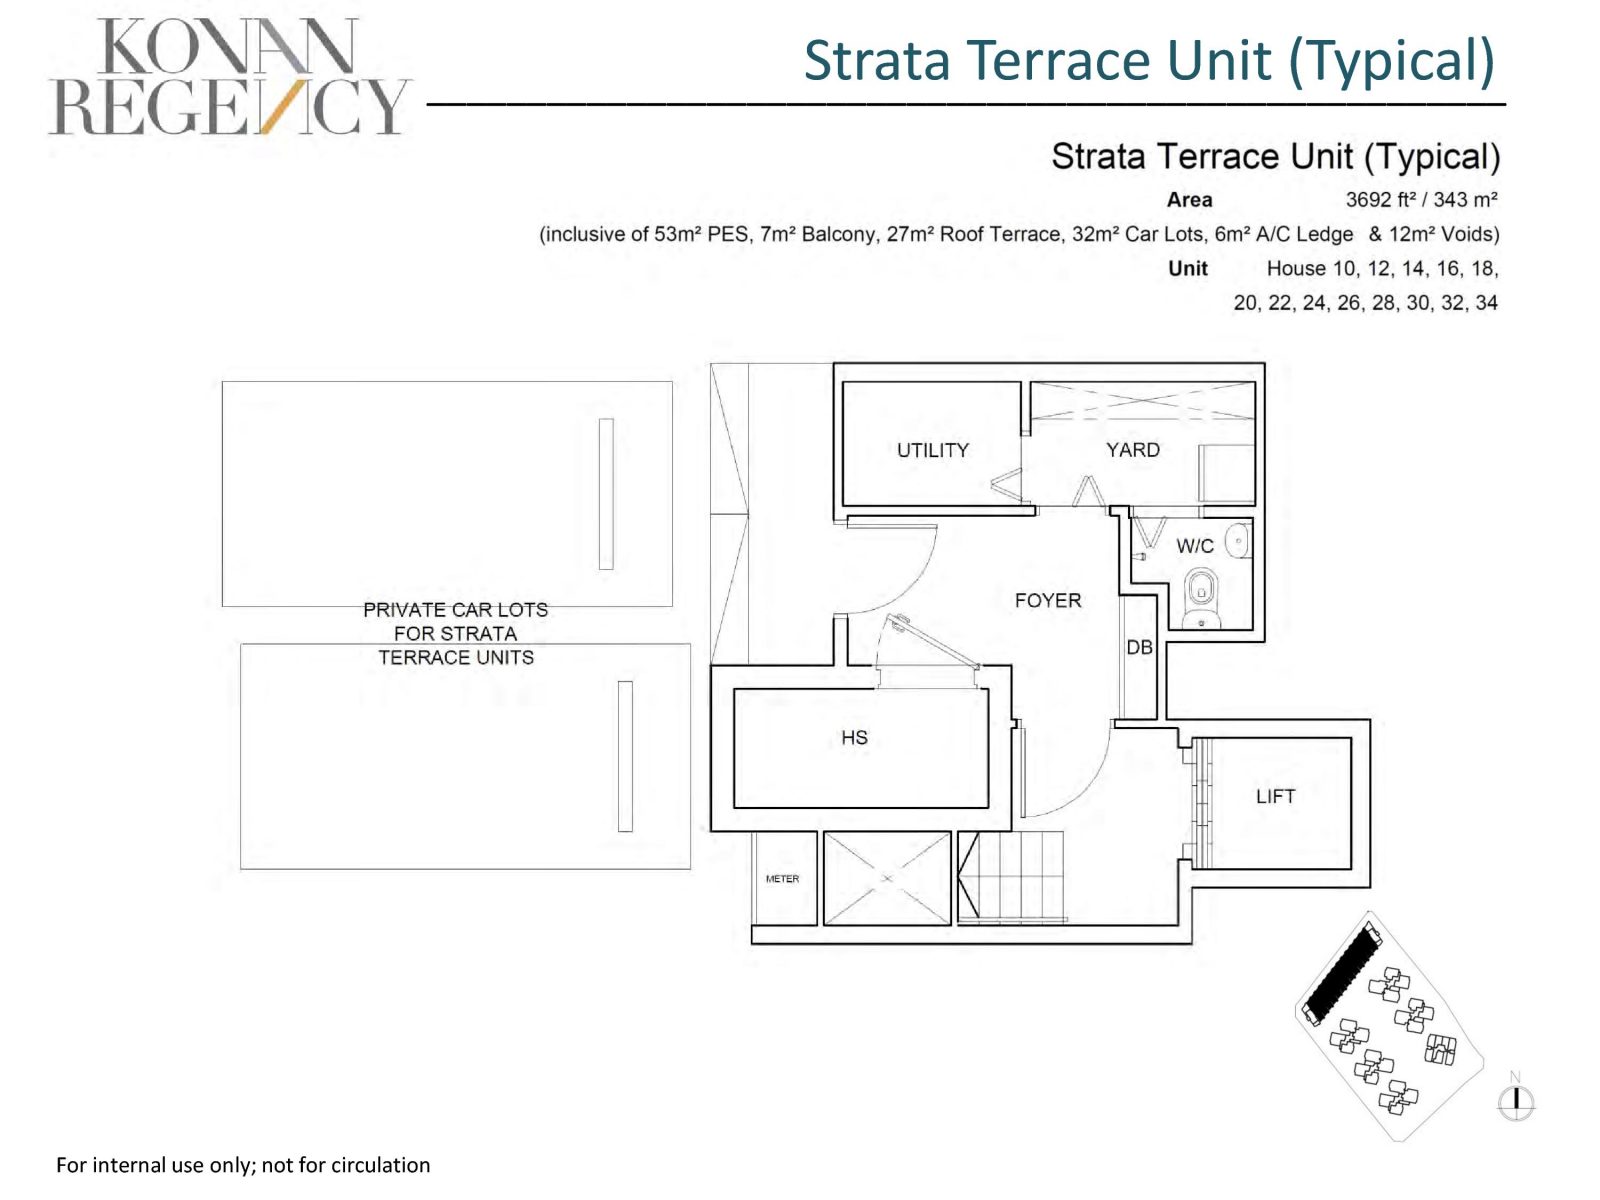 Strata Terrace Typical 1